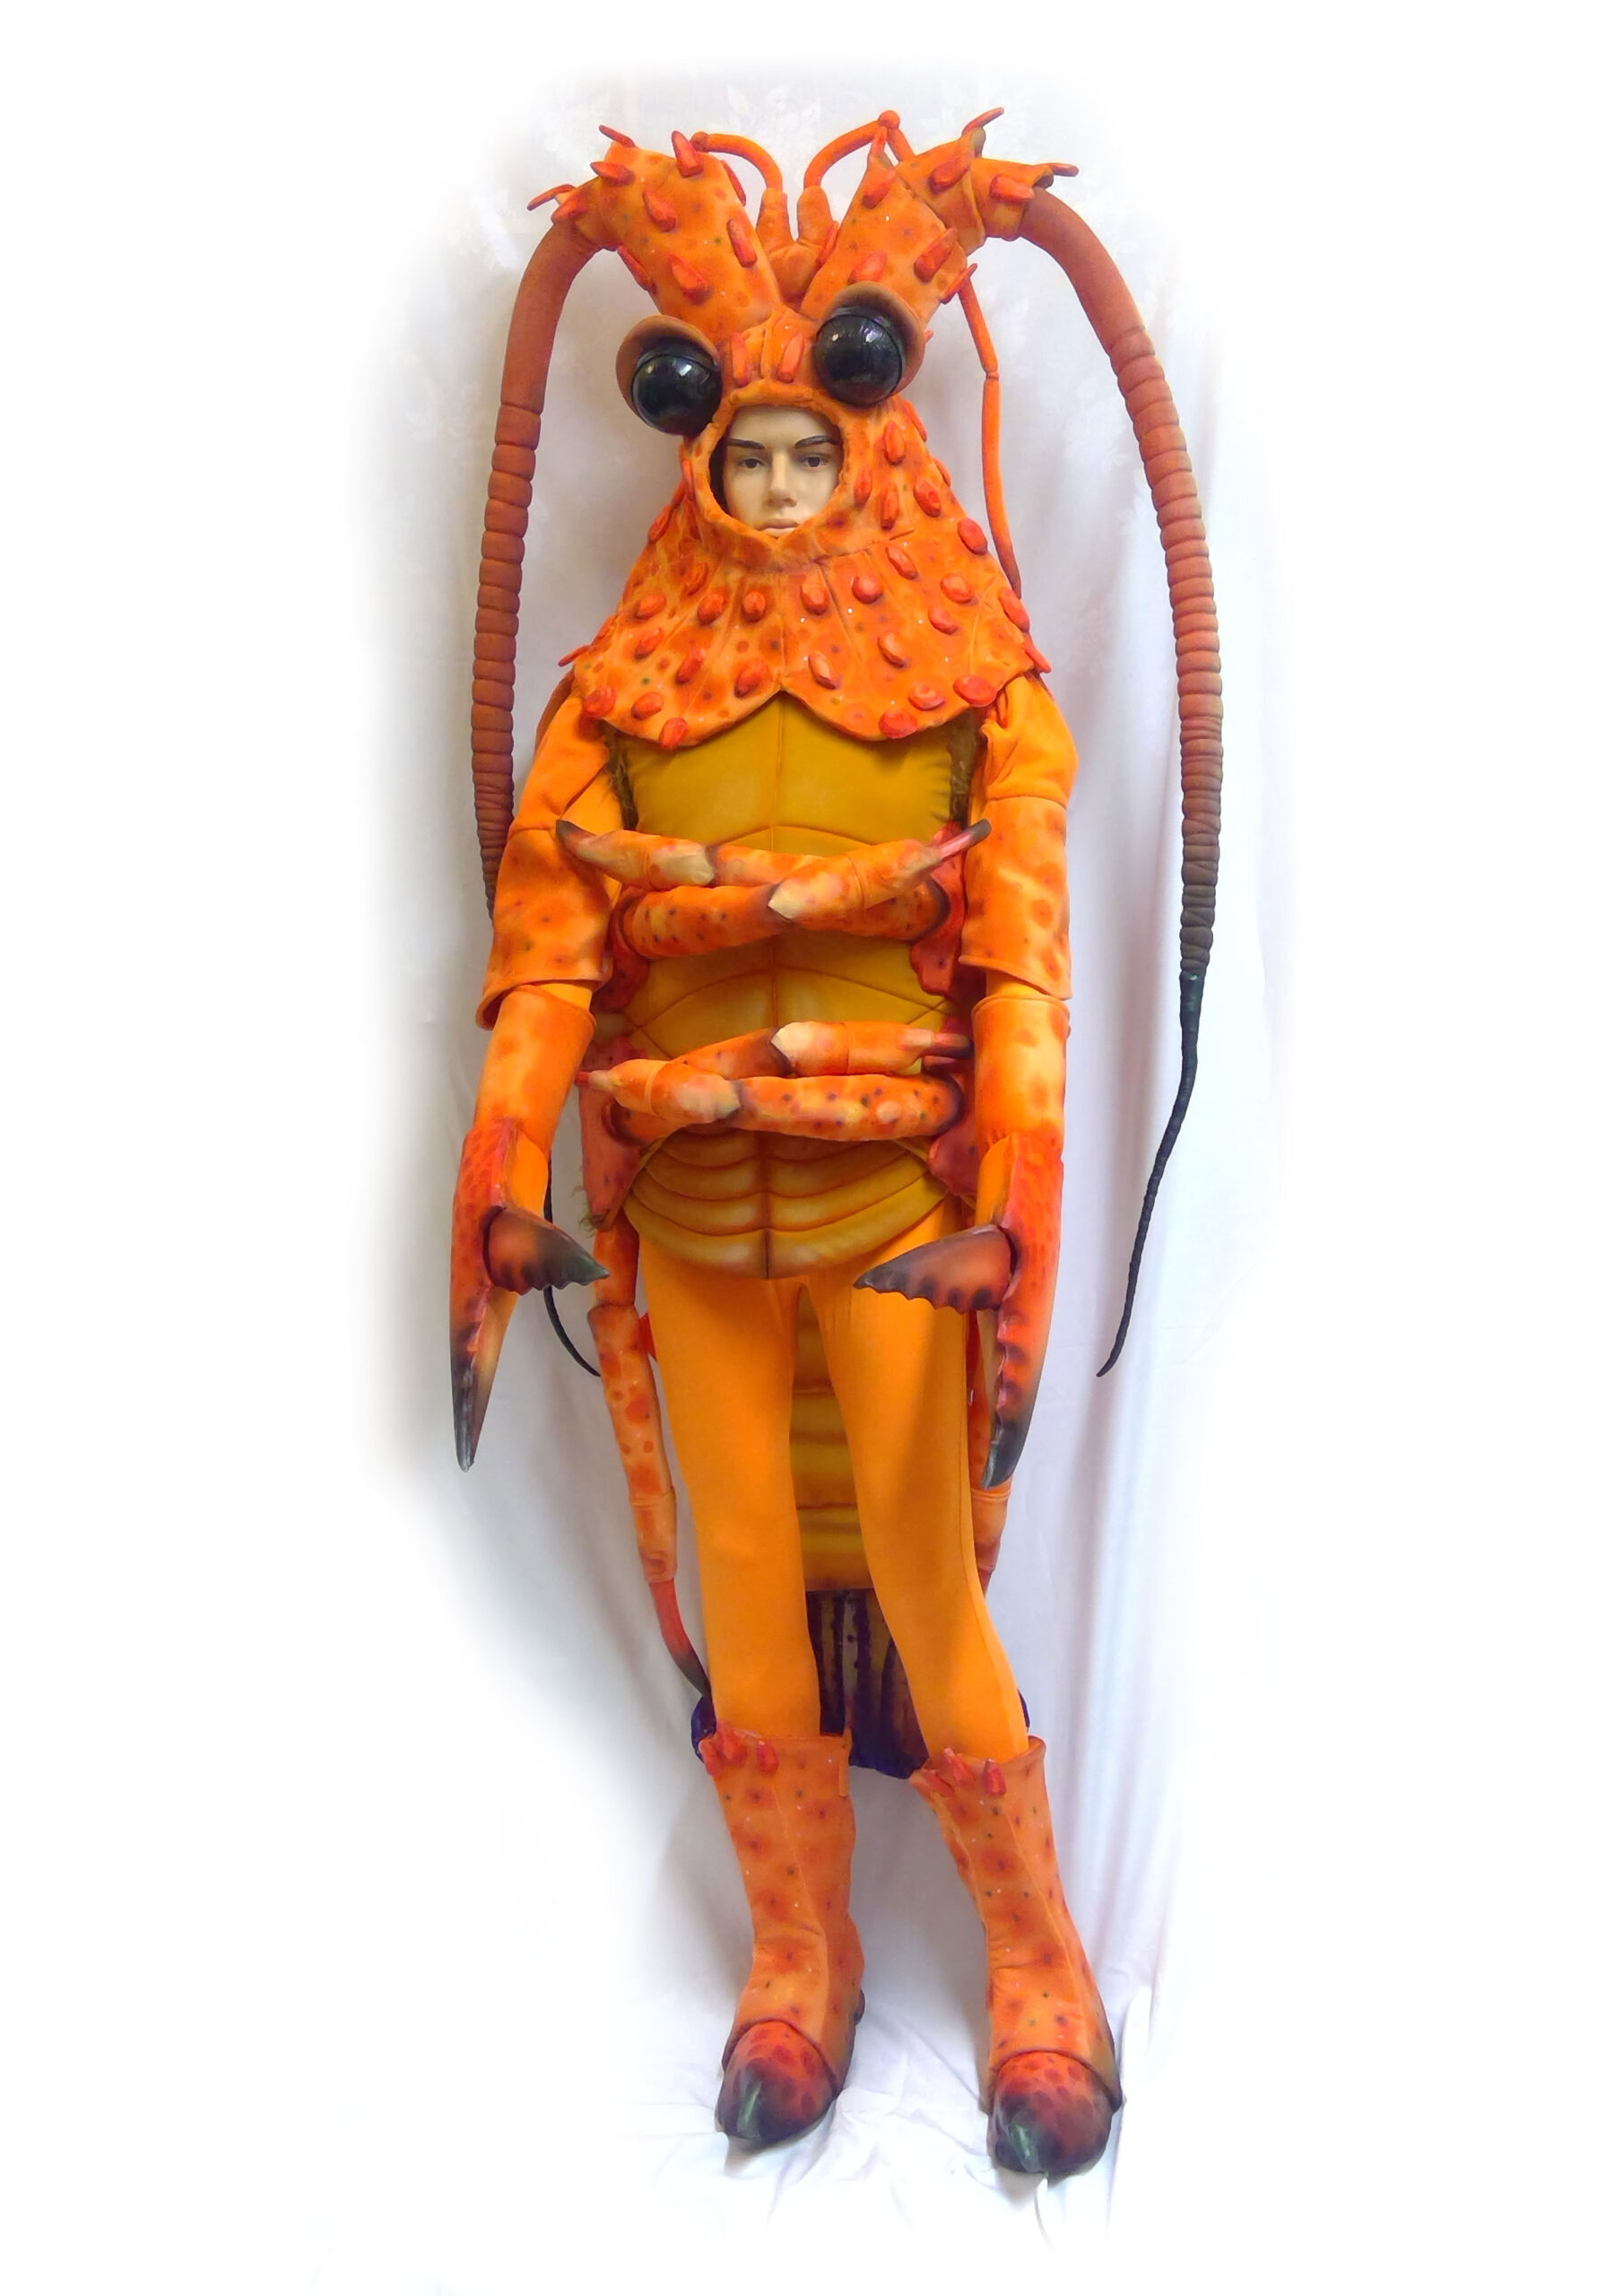 Cray: Photograph of a crayfish costume fit to a mannequin.